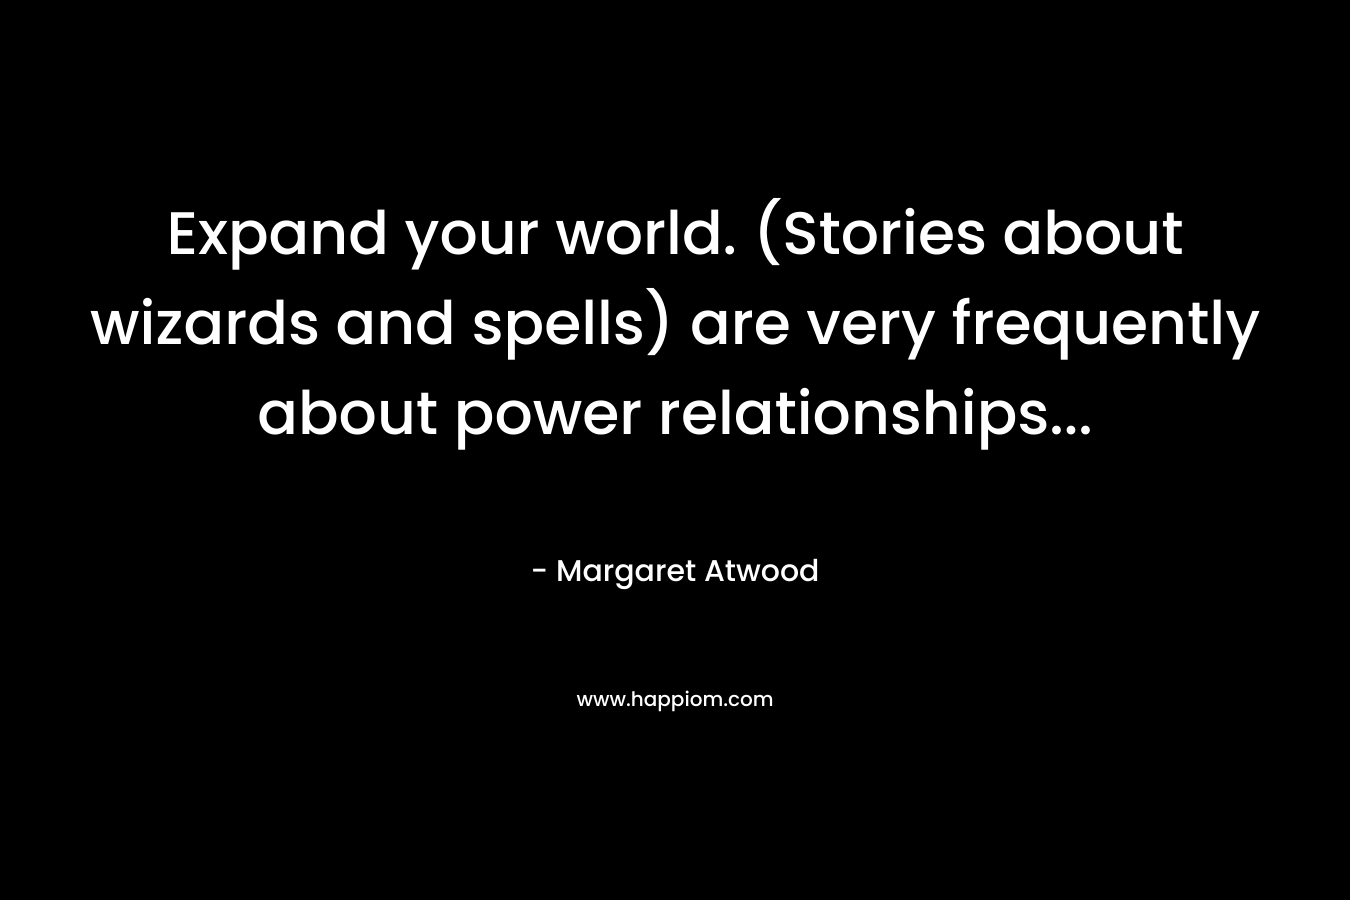 Expand your world. (Stories about wizards and spells) are very frequently about power relationships… – Margaret Atwood